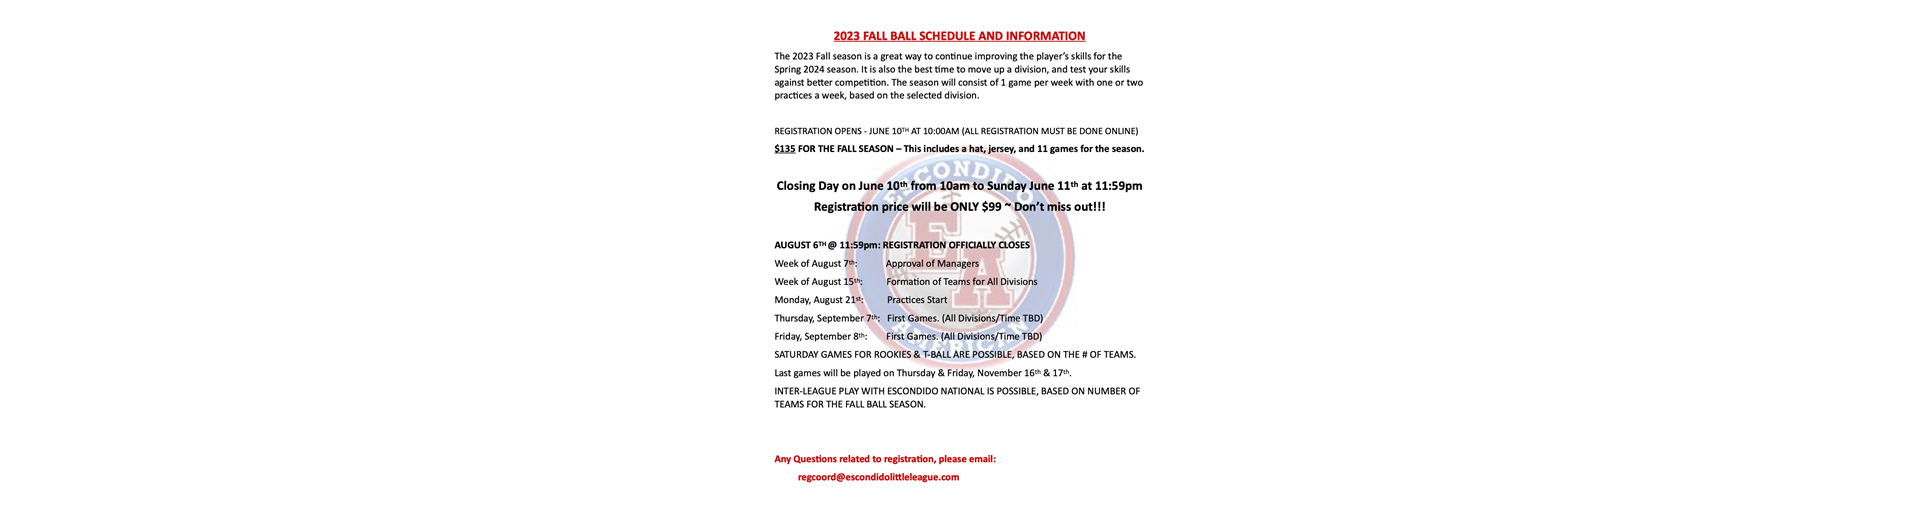 FALL BALL - IMPORTANT DATES!